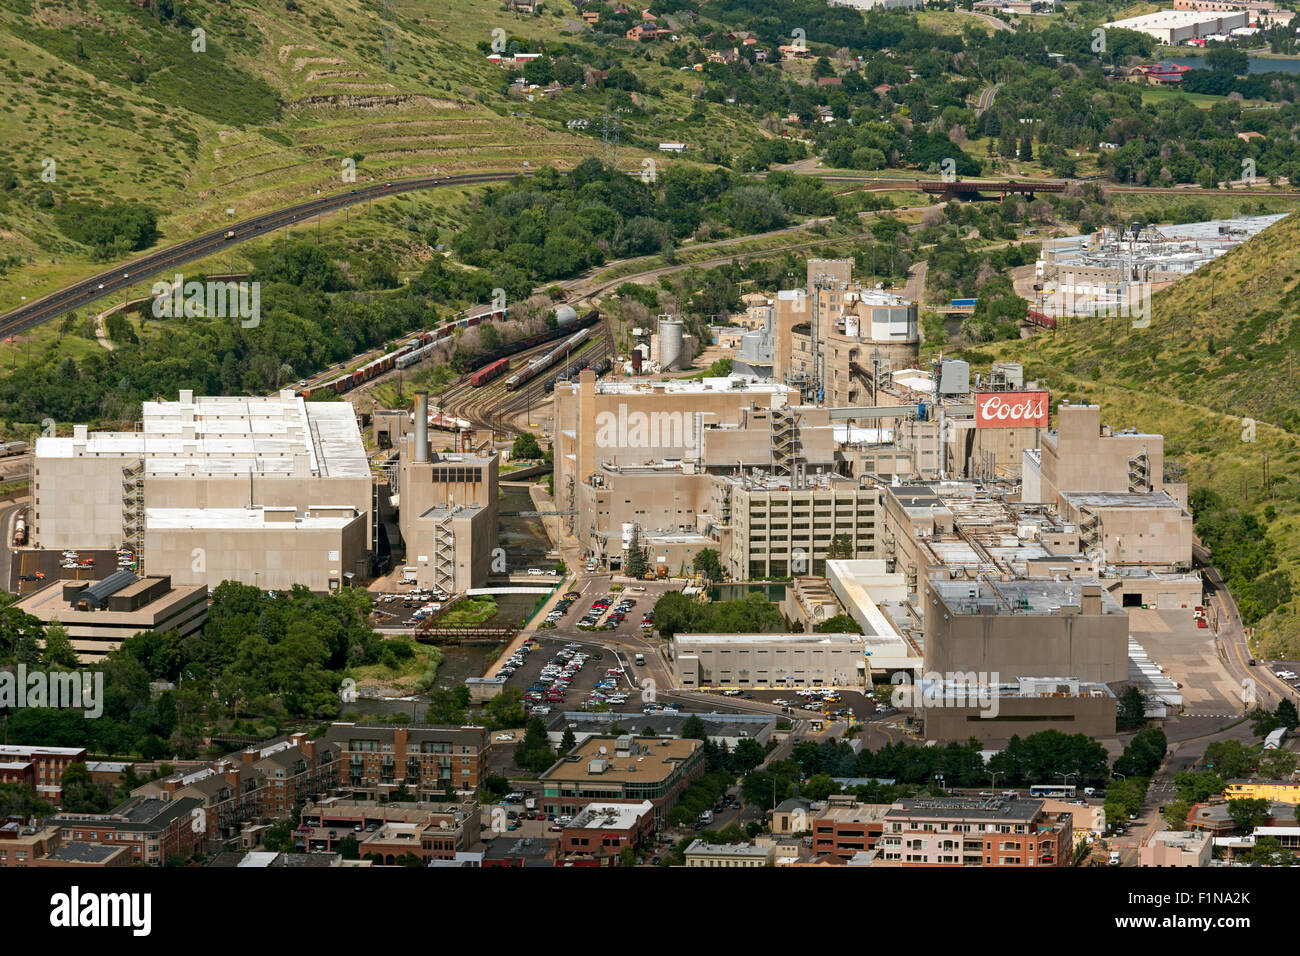 Golden, Colorado - Il Coors Brewery. Foto Stock